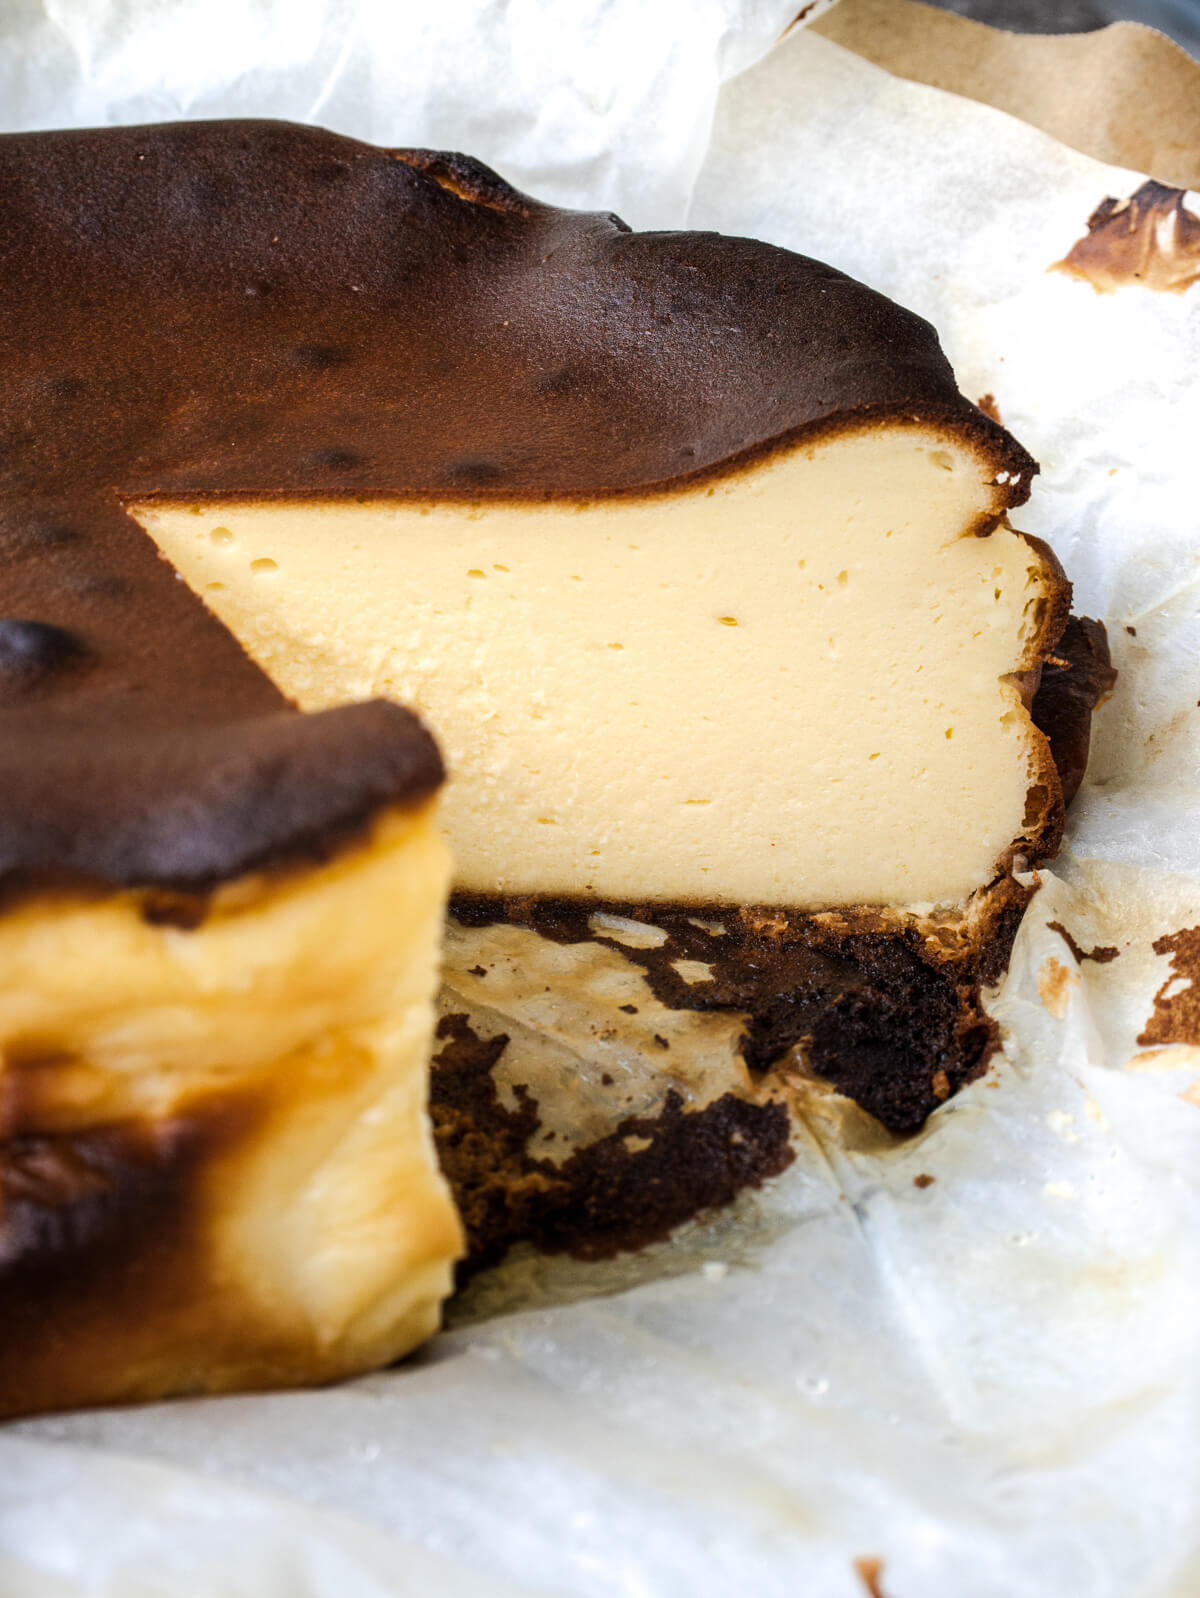 A fully baked, dark, and rustic Burnt Basque Cheesecake sitting on crumpled parchment paper with a slice missing.